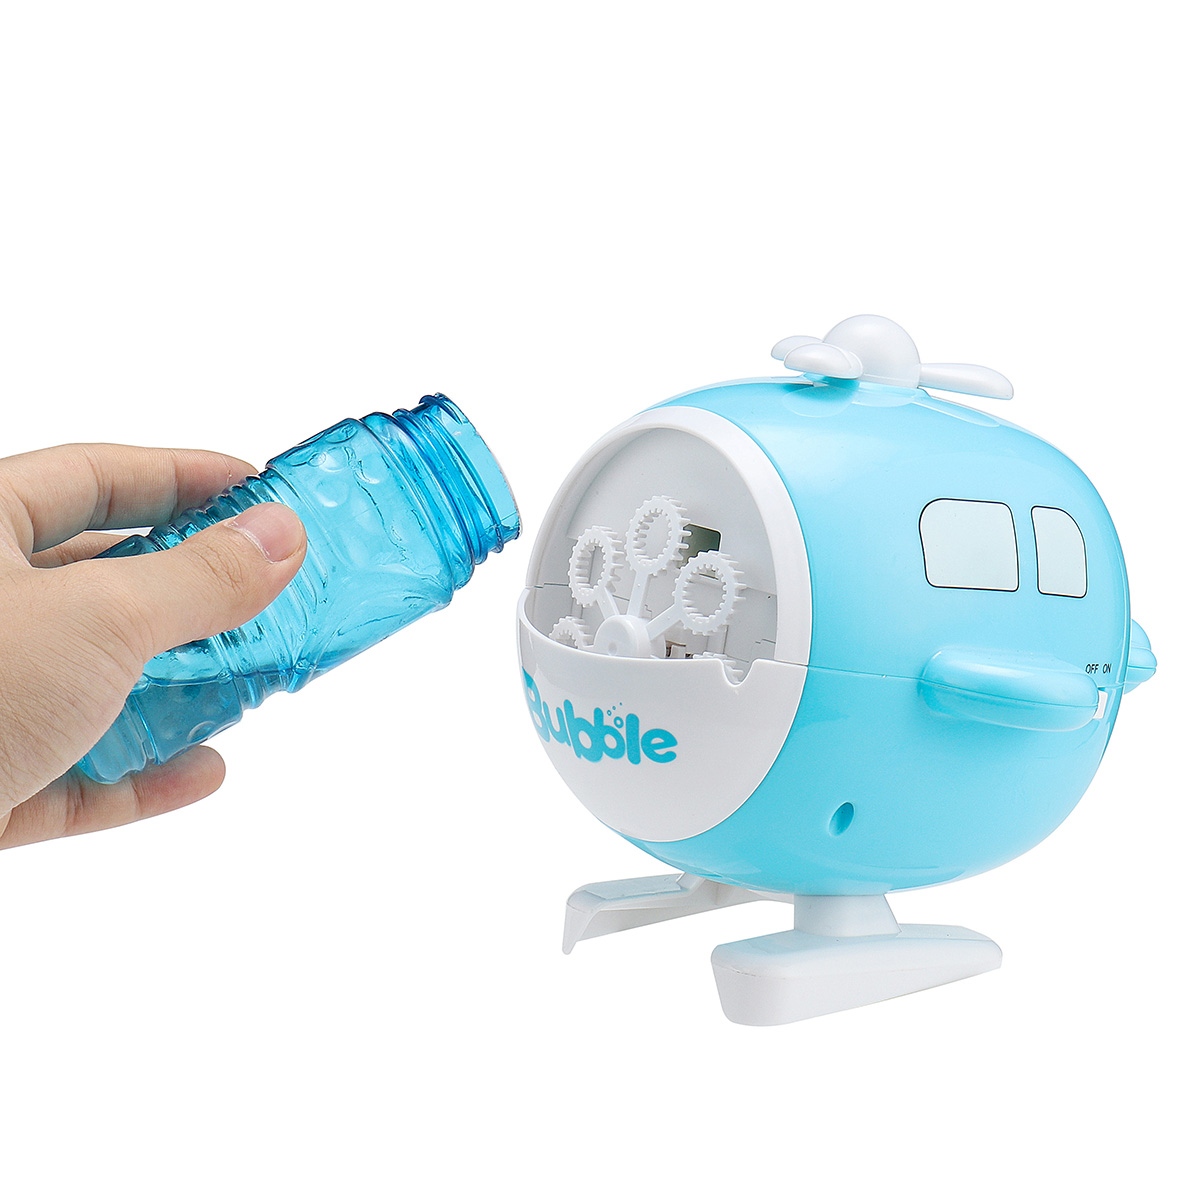 Pickwoo Electric Helicopter Shape Automatic Bubble Machine Soap Bubble Blower Outdoor Indoor Toy for Kids Gift